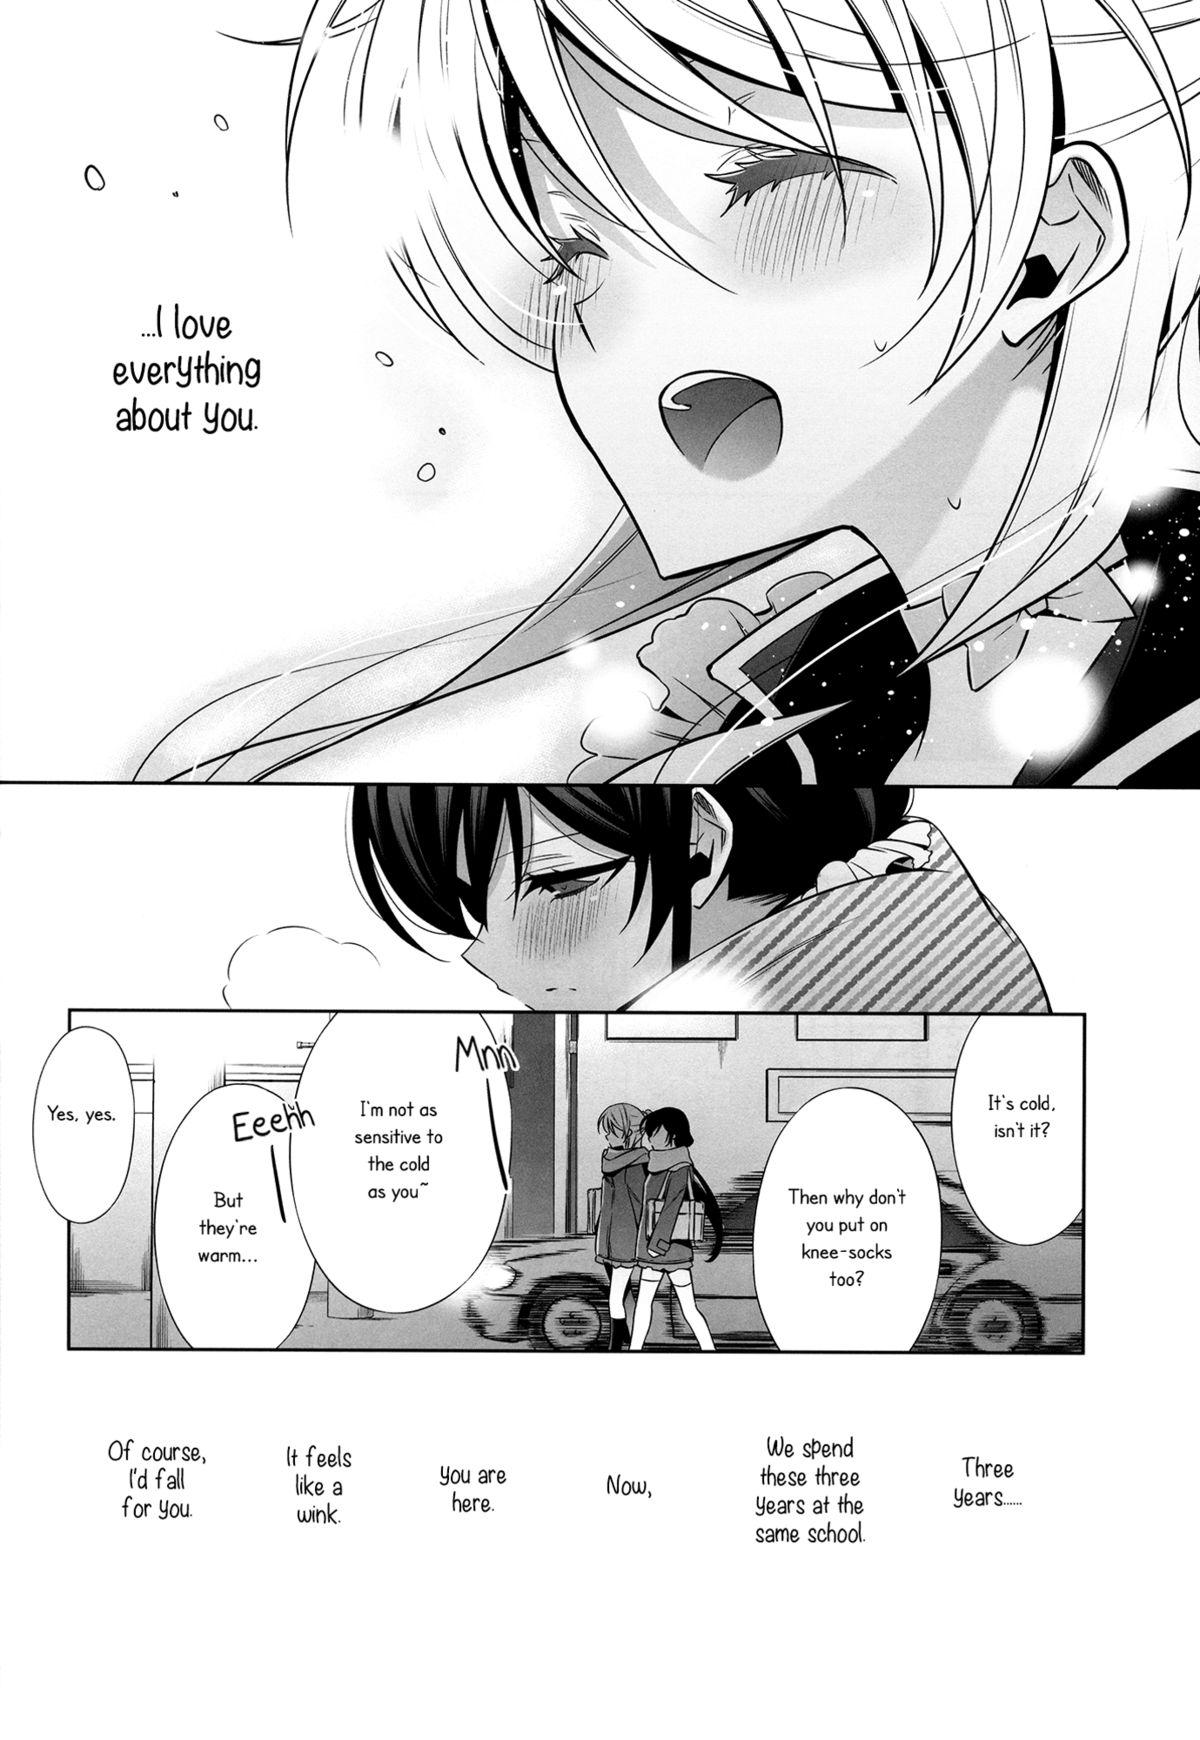 Hot Wife Haru mo Natsu mo Aki mo Fuyu mo | In Spring, In Summer, In Autumn, In Winter. Always With You! - Love live Pov Blow Job - Page 10